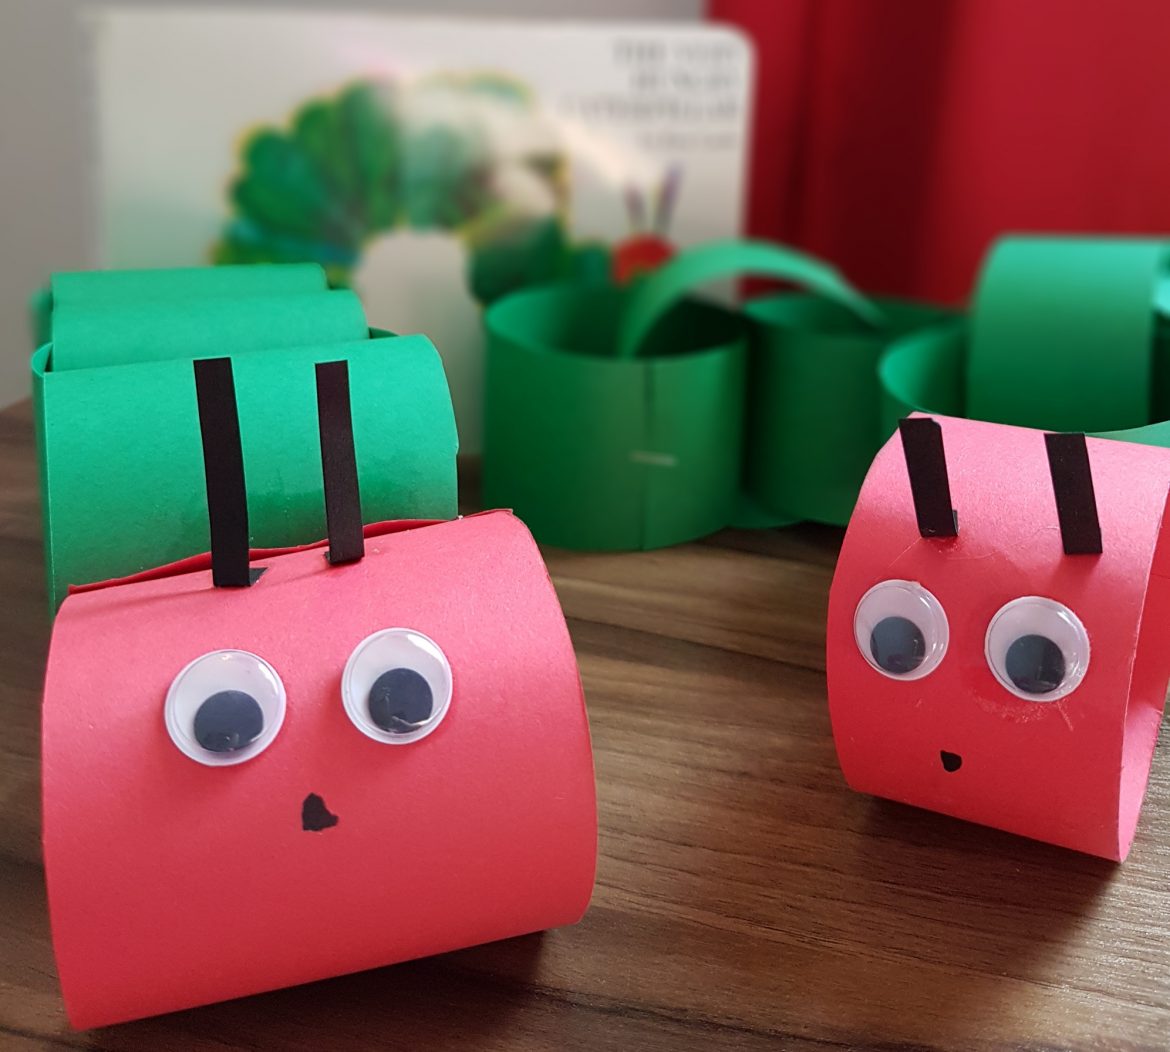 Perfect Caterpillar Craft for kids who love the very famous book The Very Hungry Caterpillar by Eric Carle. #caterpillarcraft #caterpillarcraftforkids